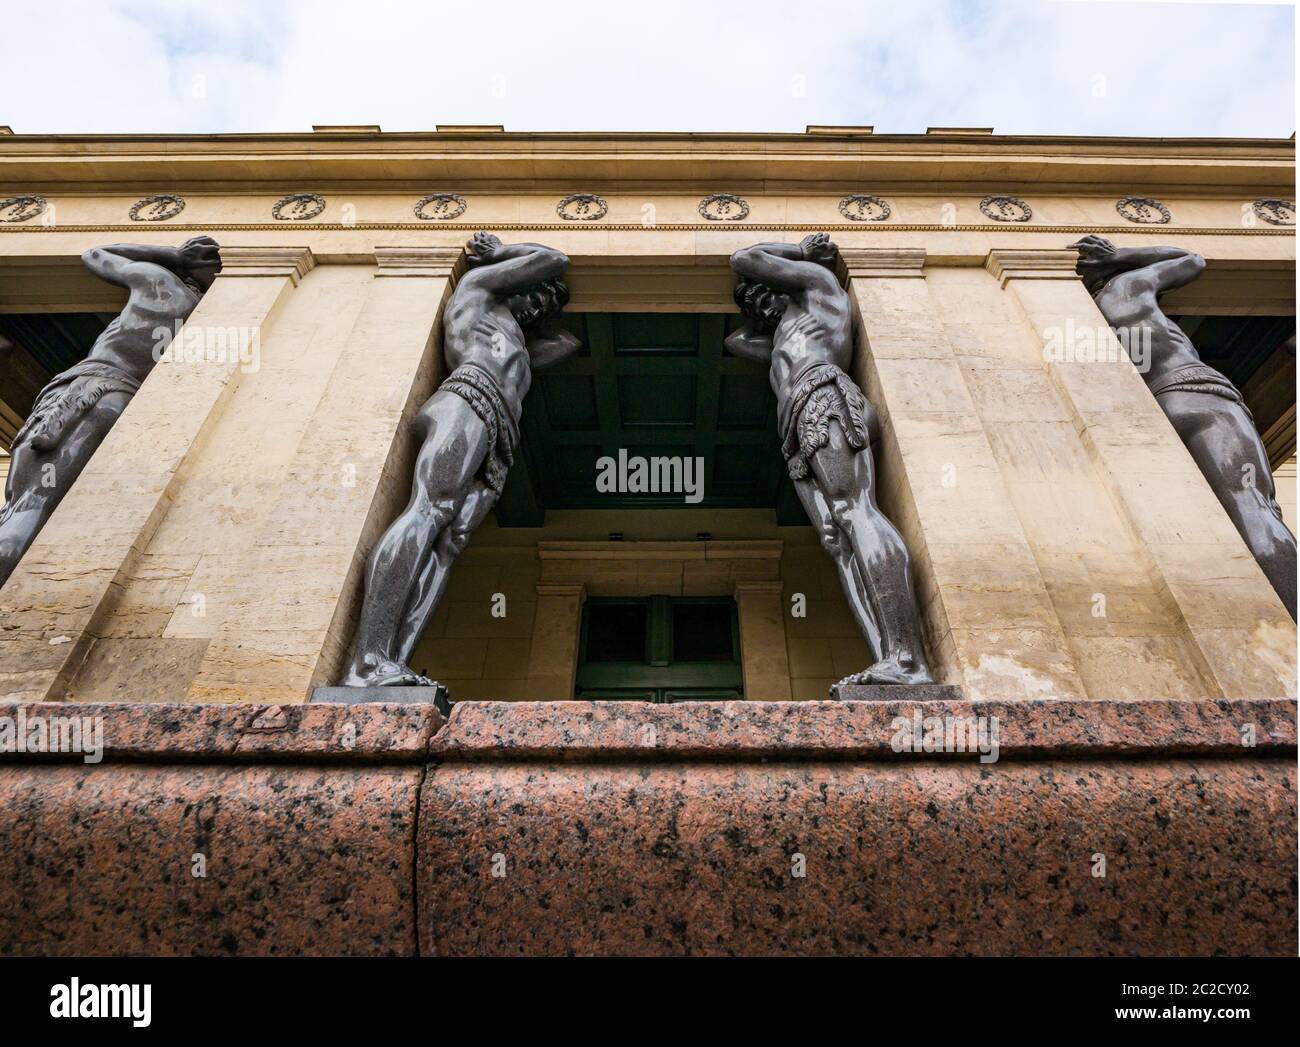 Giant Atlantis statues pillar supports on colonnade, Winter Palace, The Hermitage, St Petersburg, Russia Stock Photo